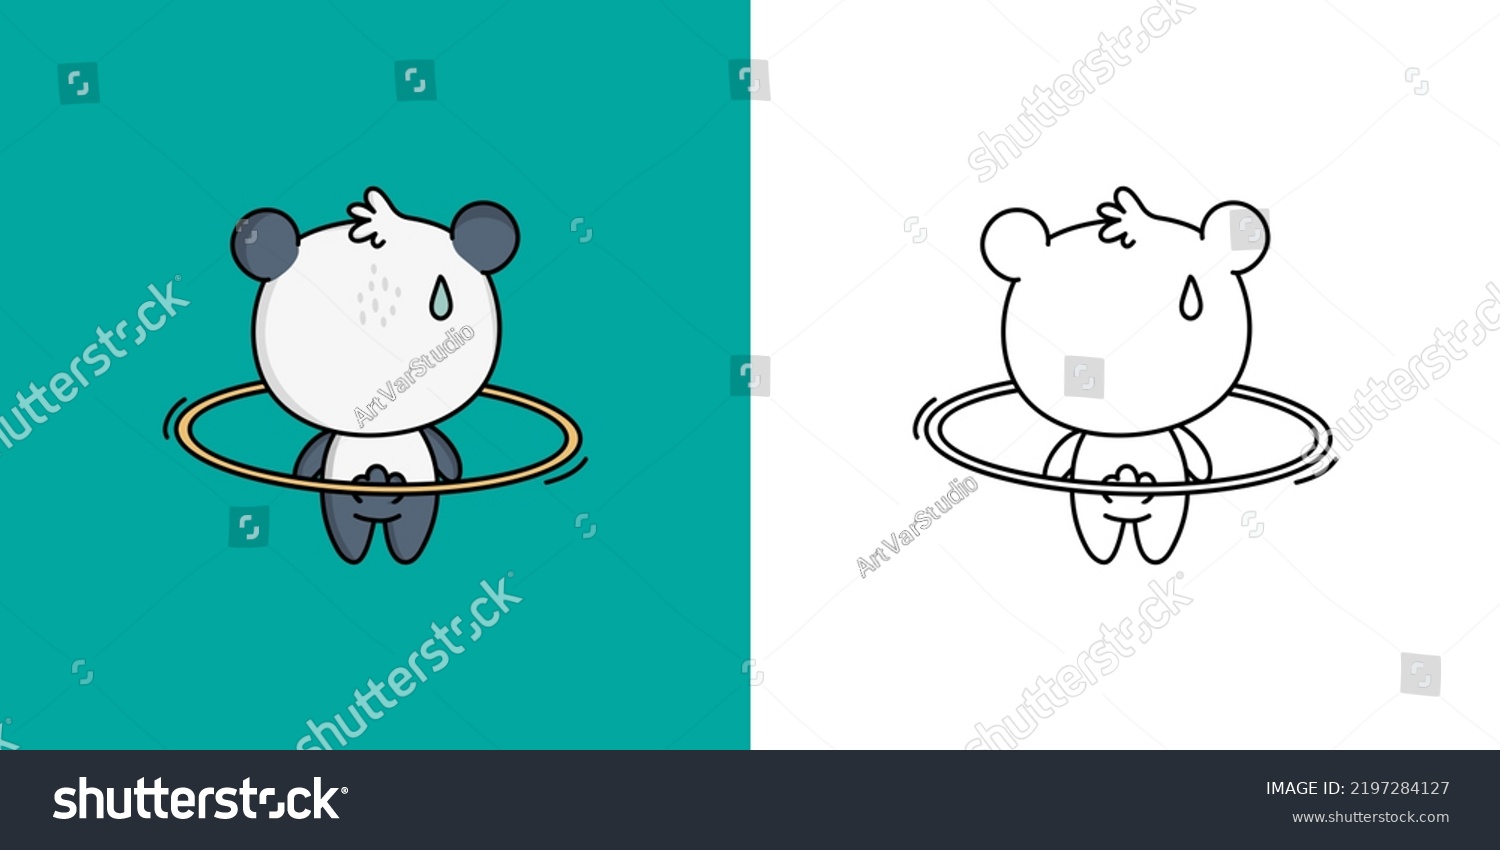 SVG of Cute Panda Athlete Clipart for Coloring Page and Illustration. Happy Panda Bear Sportsman. Vector Illustration of a Kawaii Animal for Stickers, Prints for Clothes, Baby Shower, Coloring Pages.
 svg